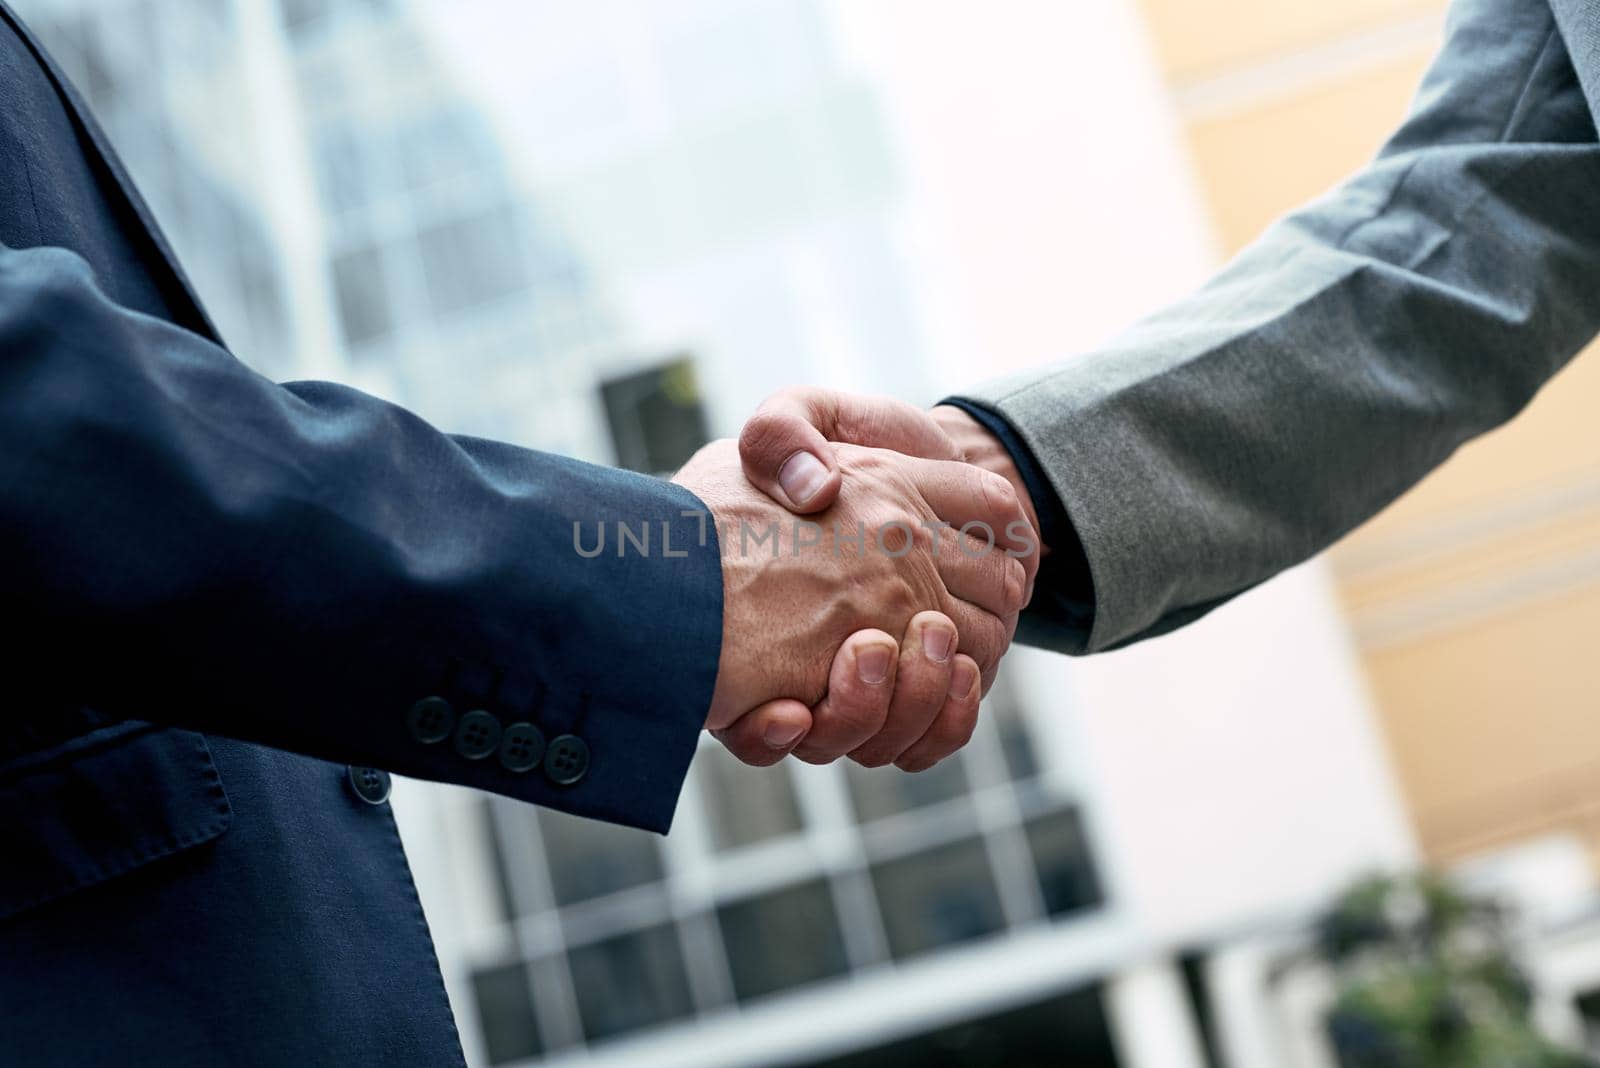 Business people shaking hands, Greeting Deal Concept, modern city background